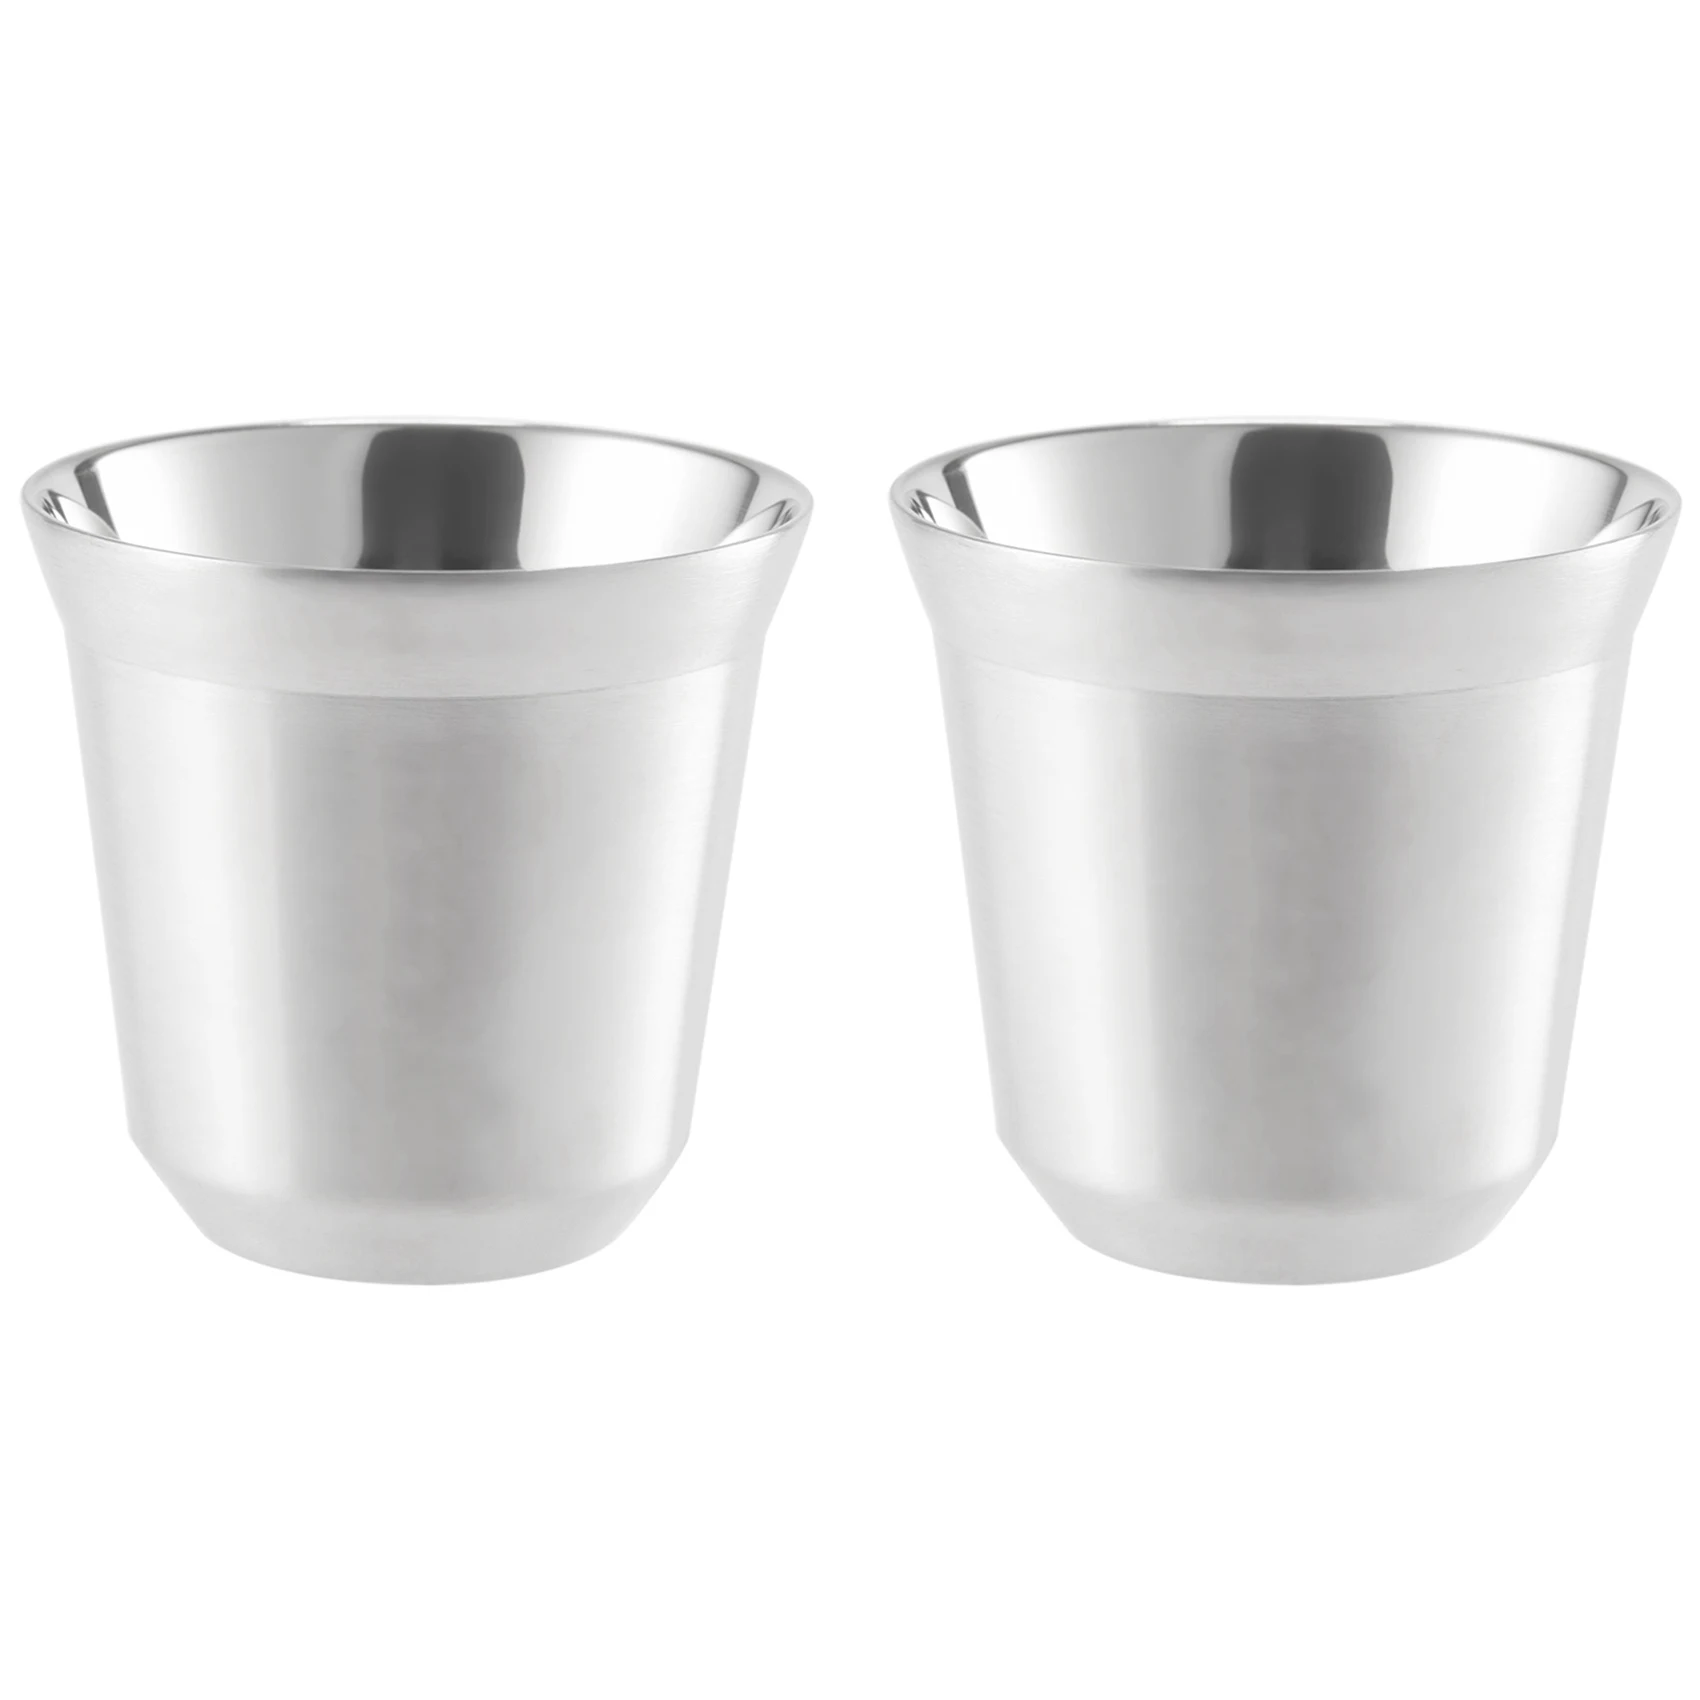 

Steel Espresso Cups Set of 2 Double Wall Insulated Coffee Mugs Tea Cups Easy Clean and Dishwasher Safe (80ML)